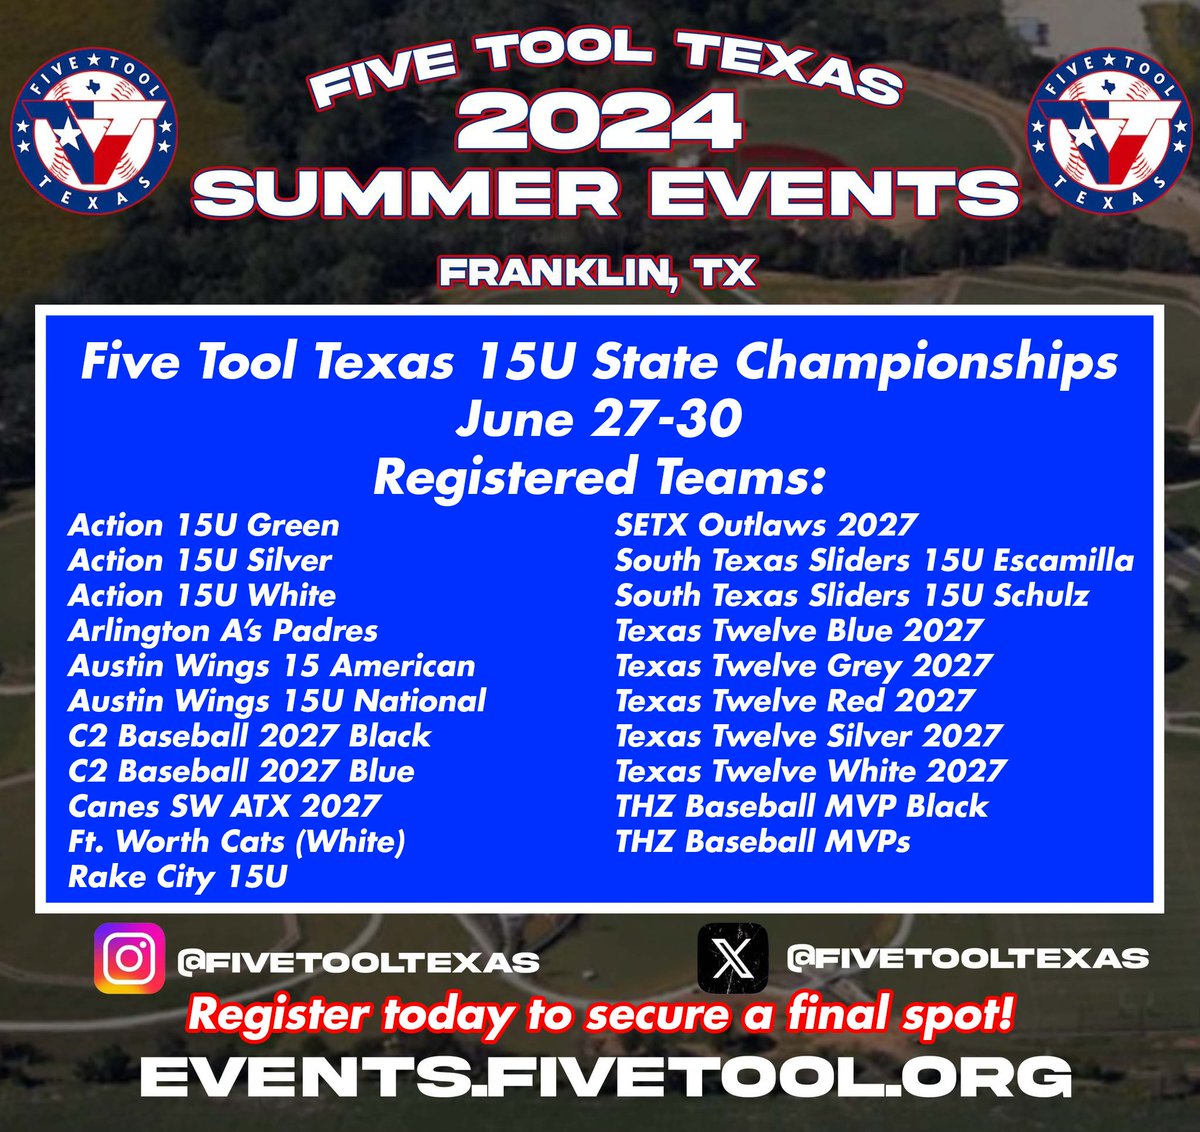 The @FiveTool Texas 15U State Championships has been opened up to accommodate eight additional teams. 🗓️June 27-30 📍Franklin, TX 📱Full social media coverage Sign up today to secure the last few spots » events.fivetool.org/events/five-to… #WatchEm